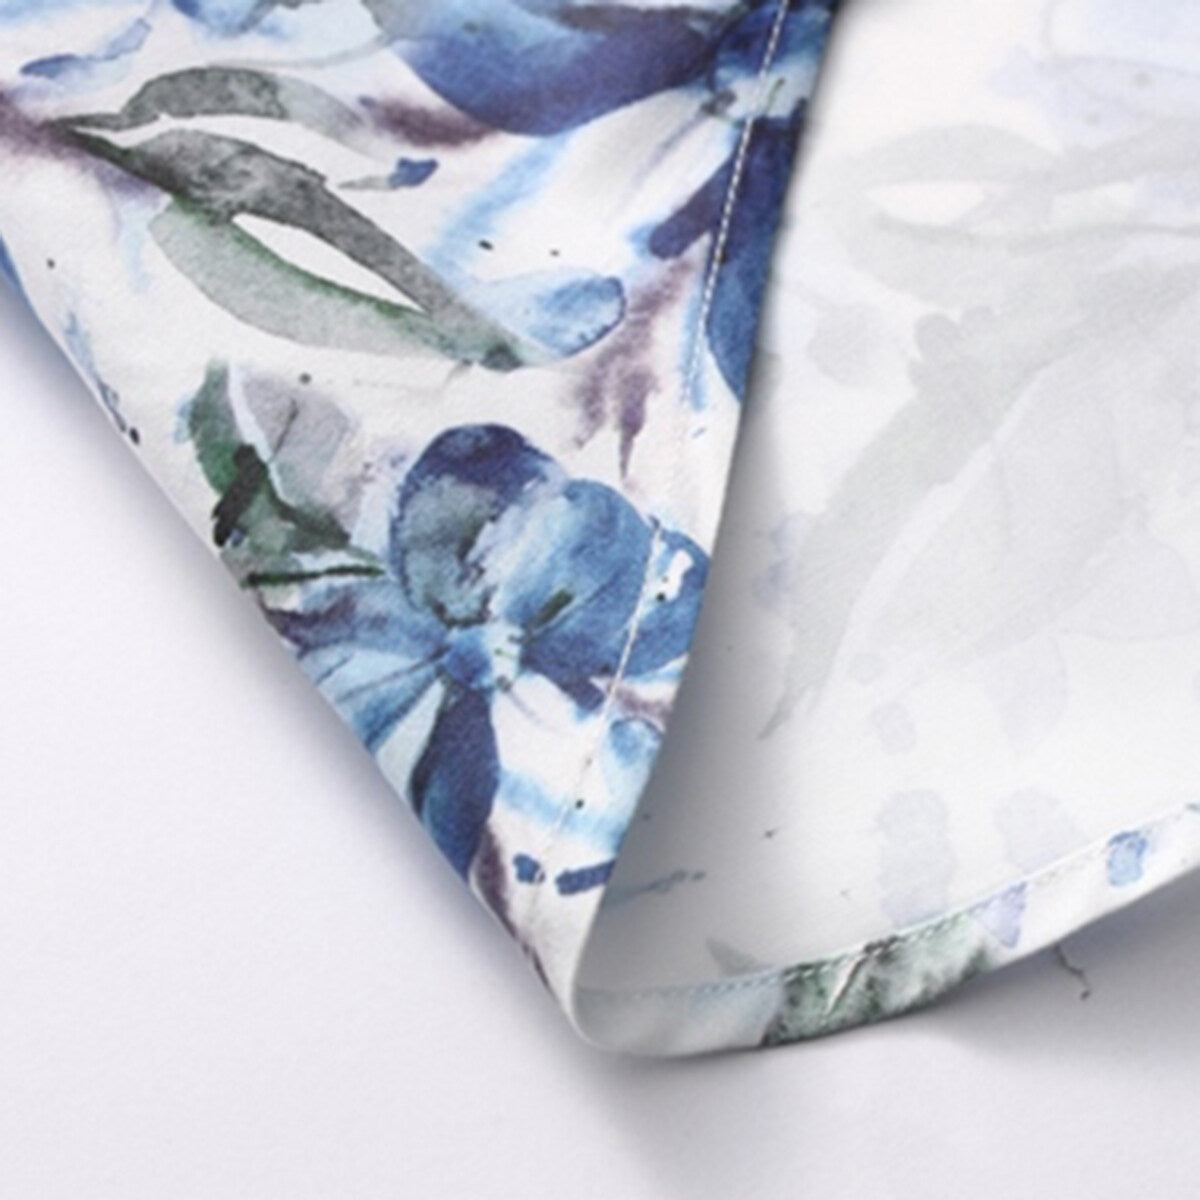 Men's Printed Short-Sleeve Blue Flower Casual Shirts White